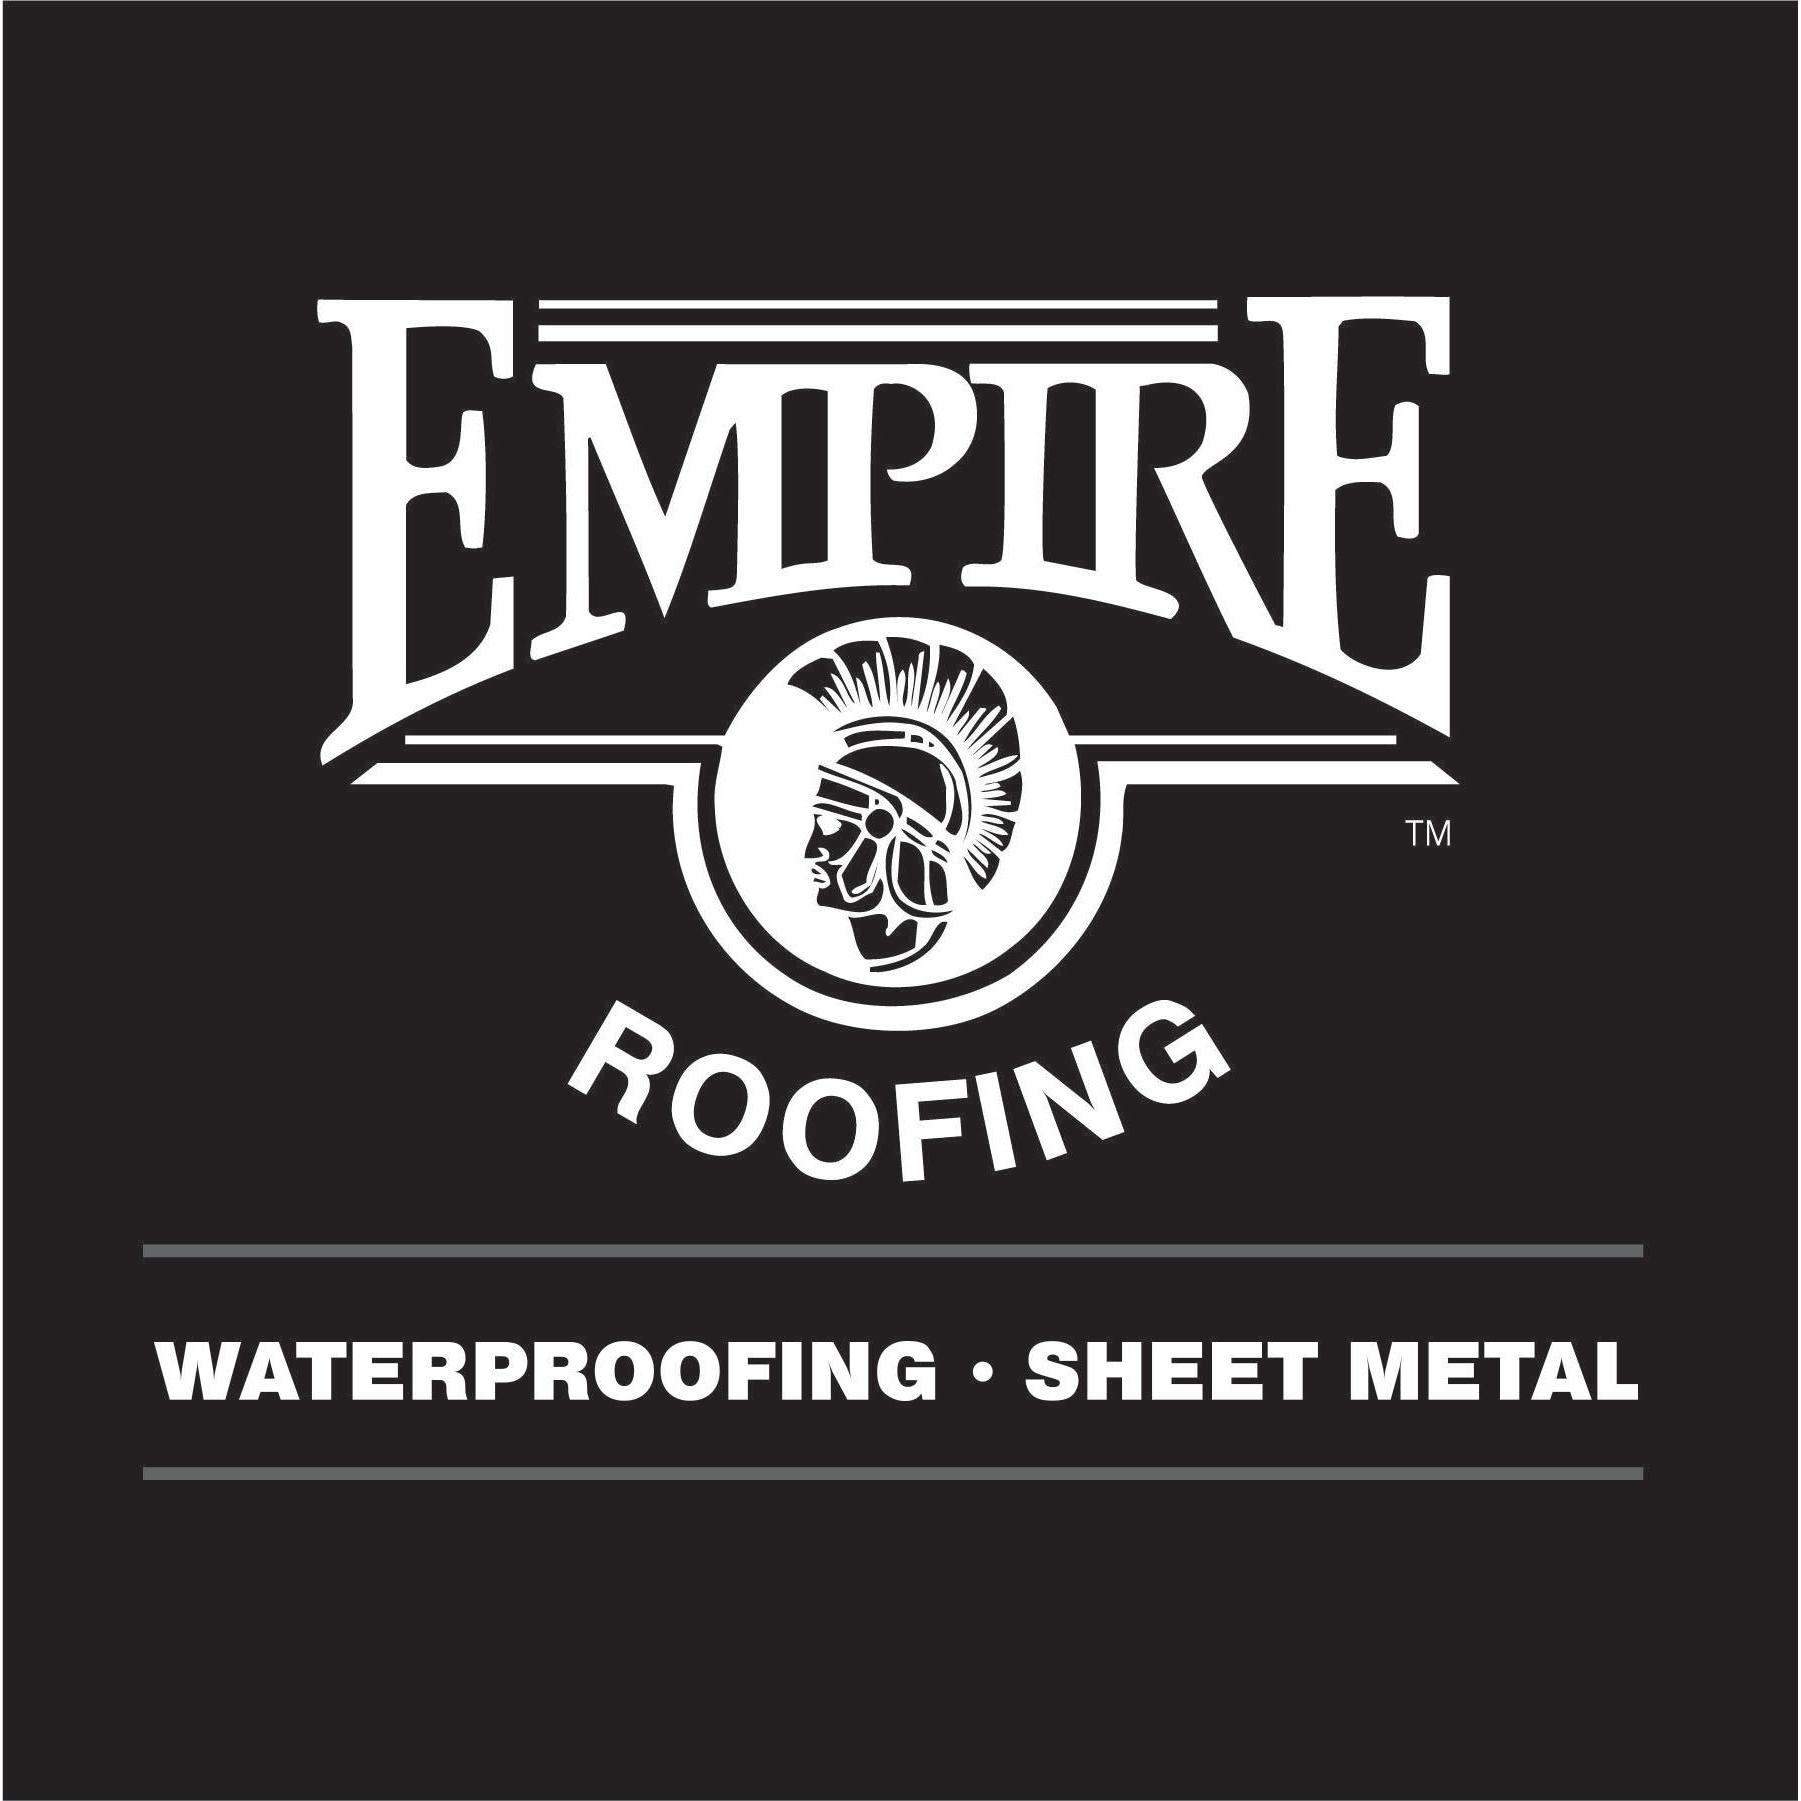 Empire Roofing Photo